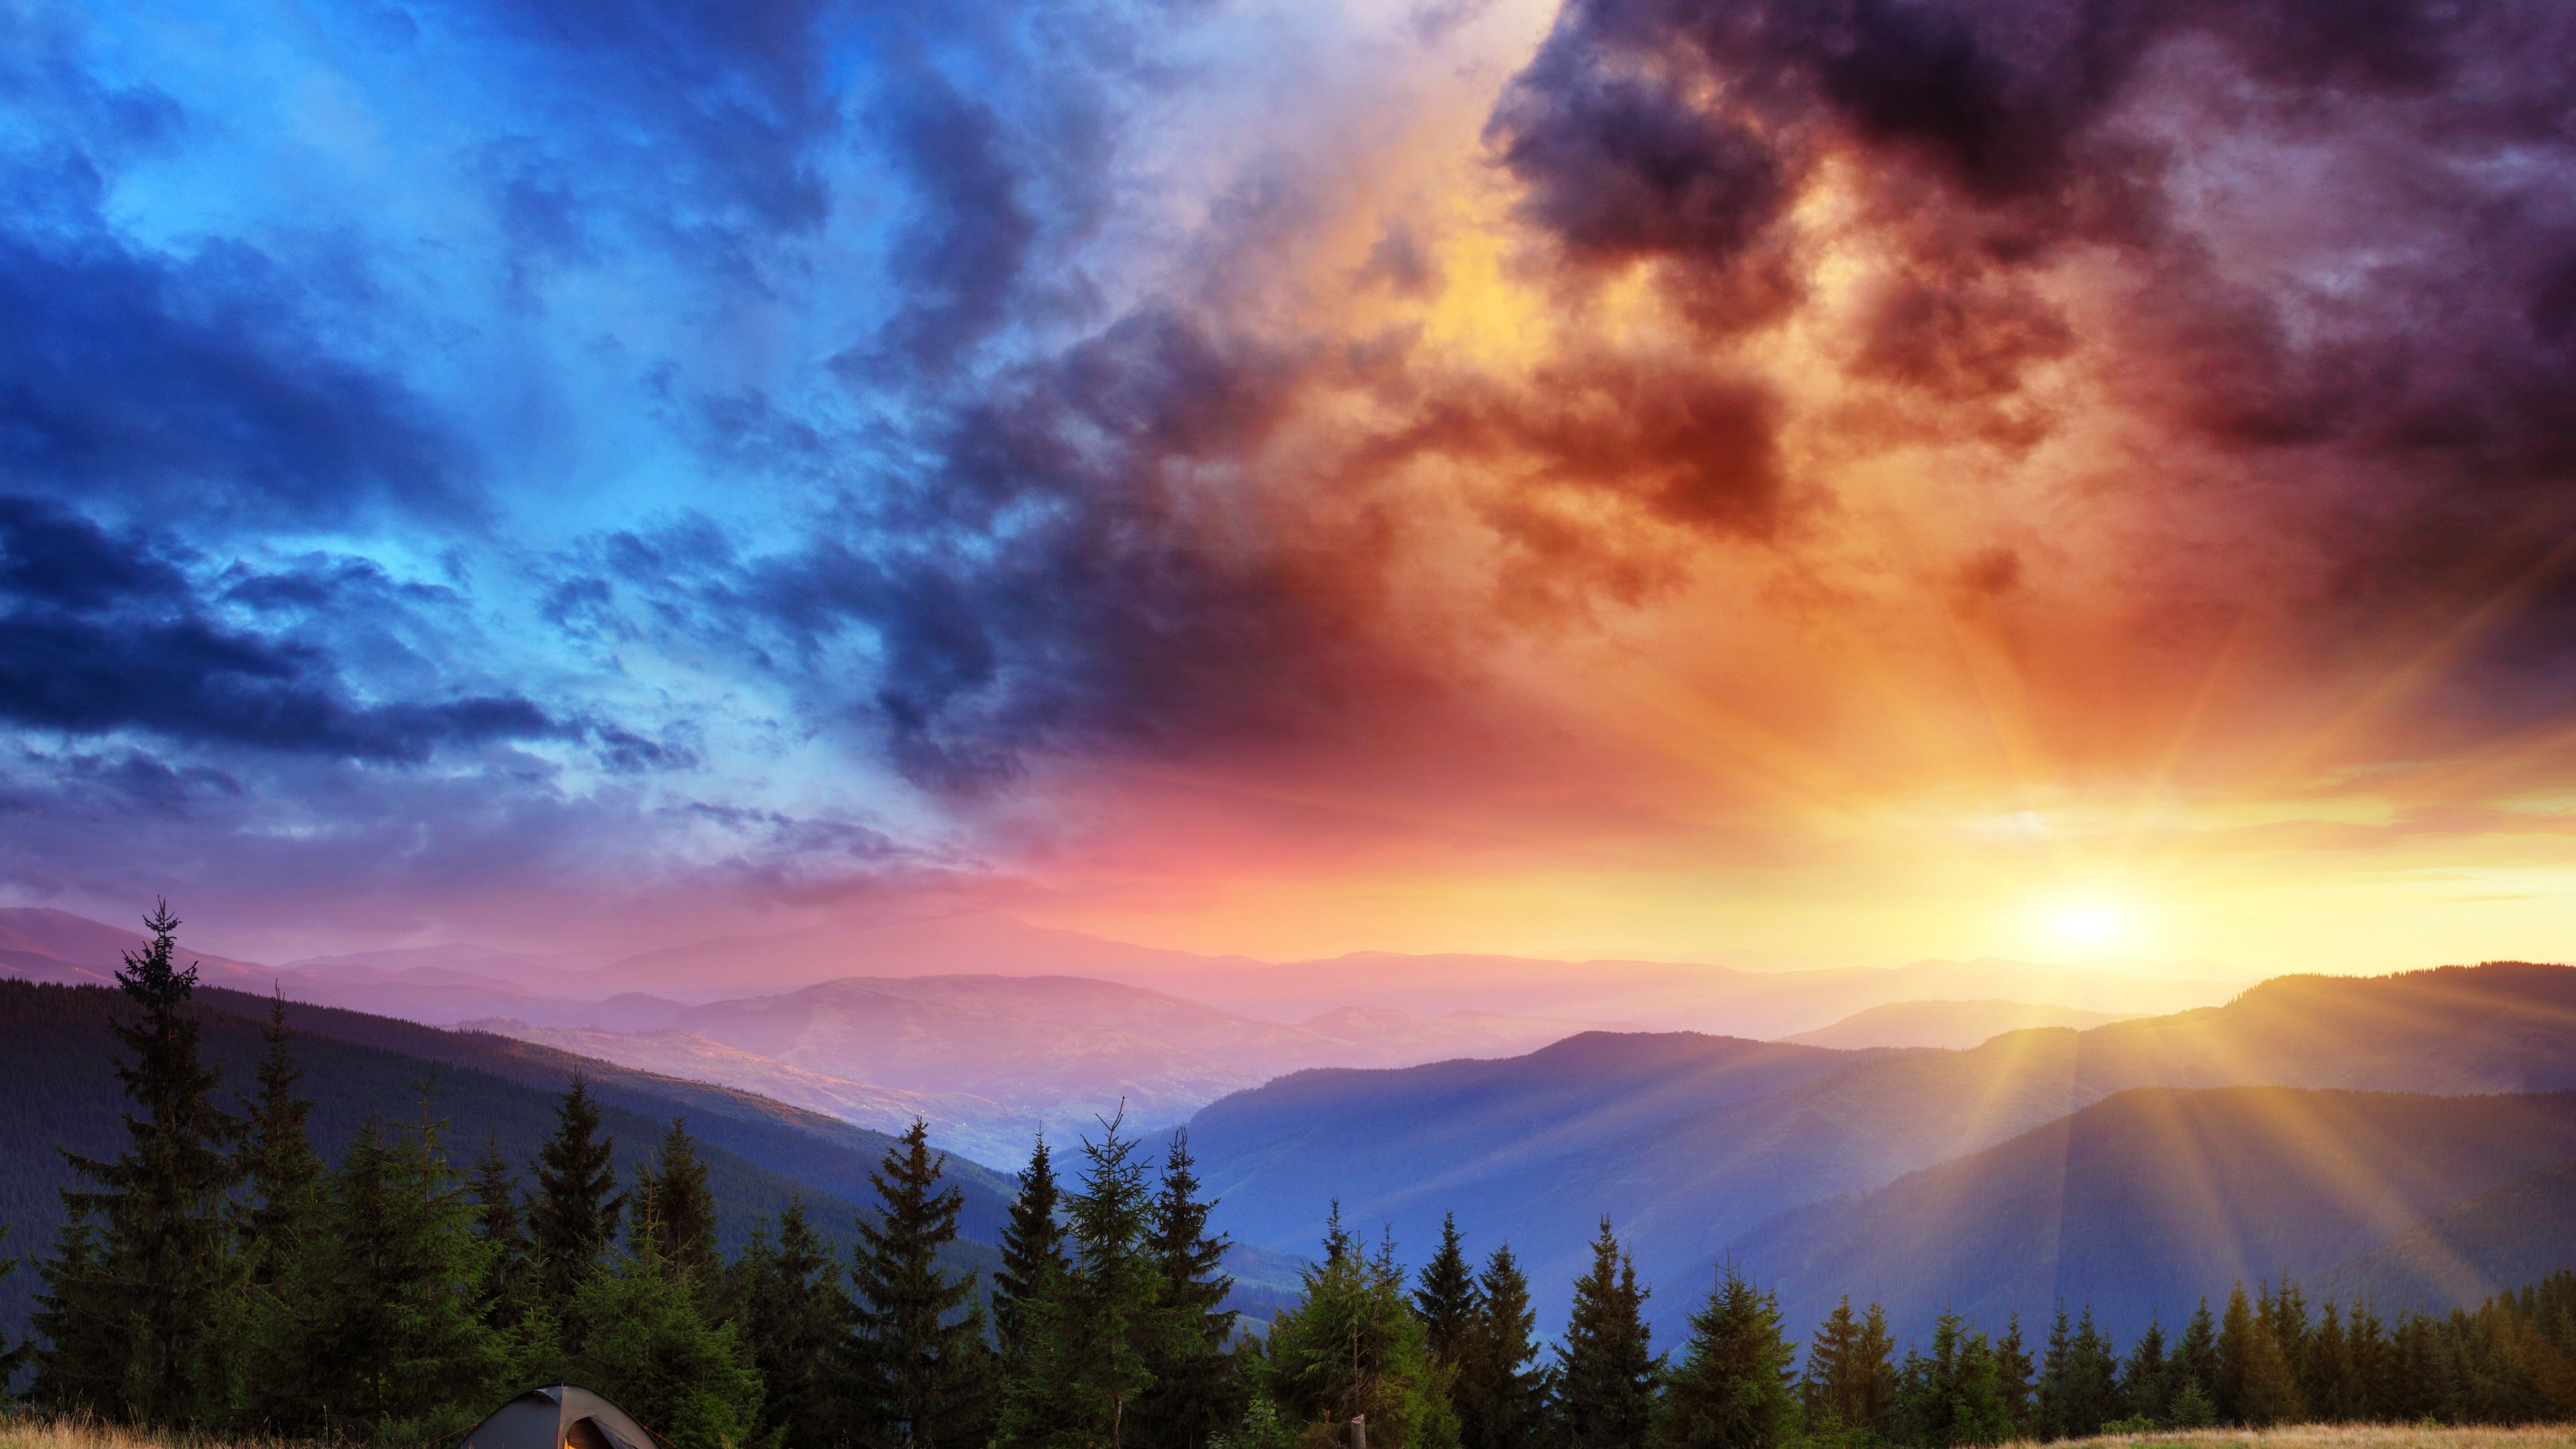 525 Sunrise HD Wallpapers | Background Images - Wallpaper ...